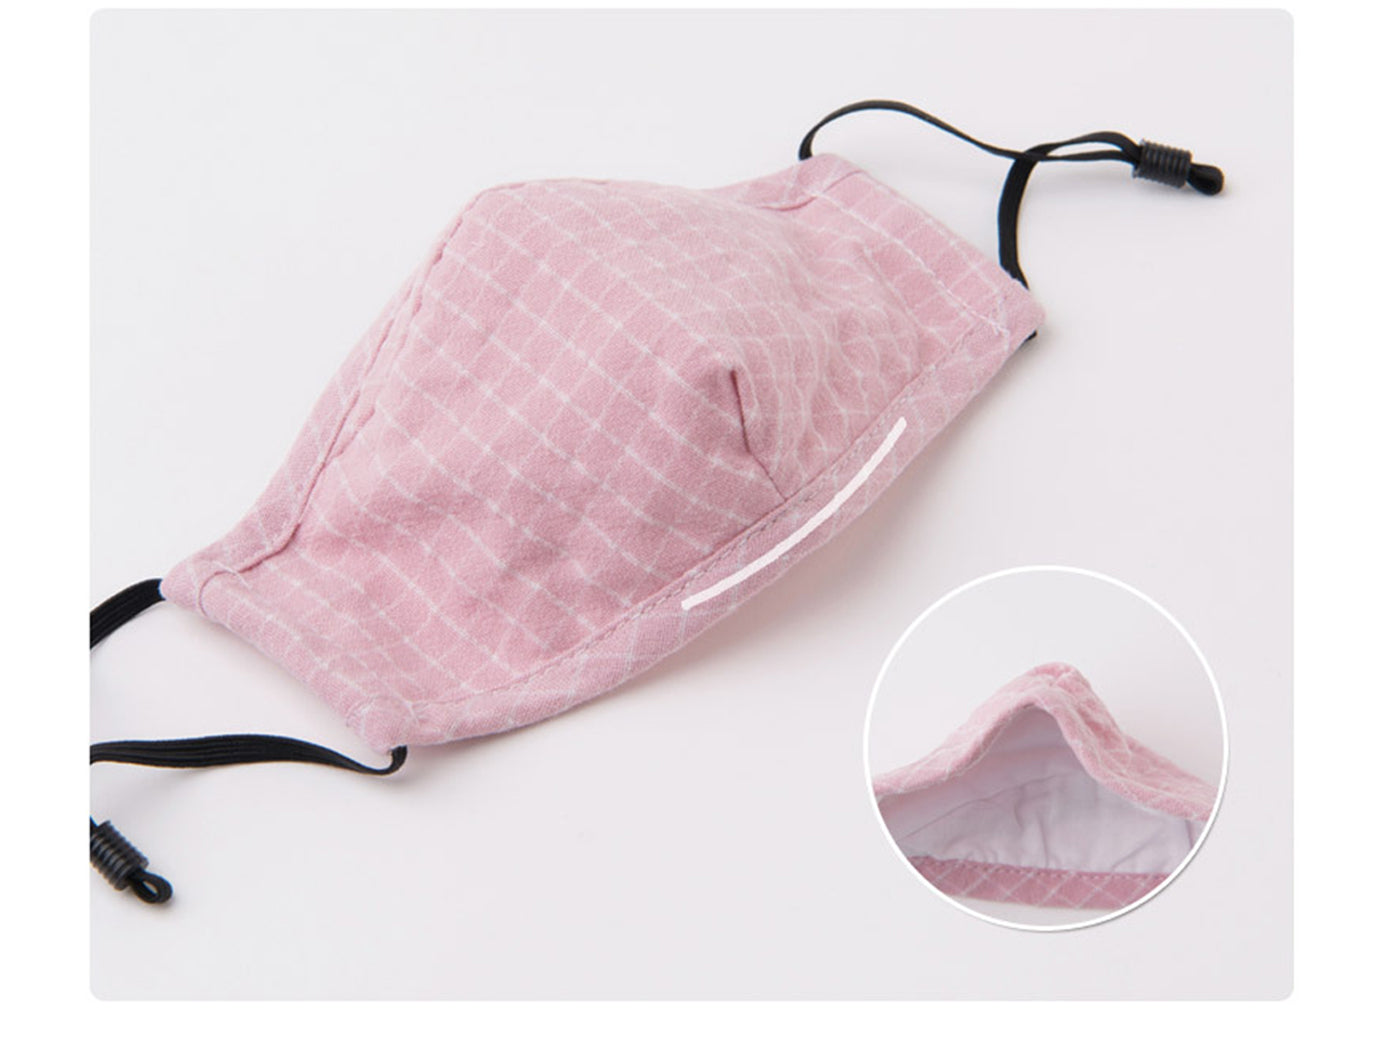 Unisex Child Anti Haze Cotton Mouth Cover Dust-Proof Breathable Face Cover